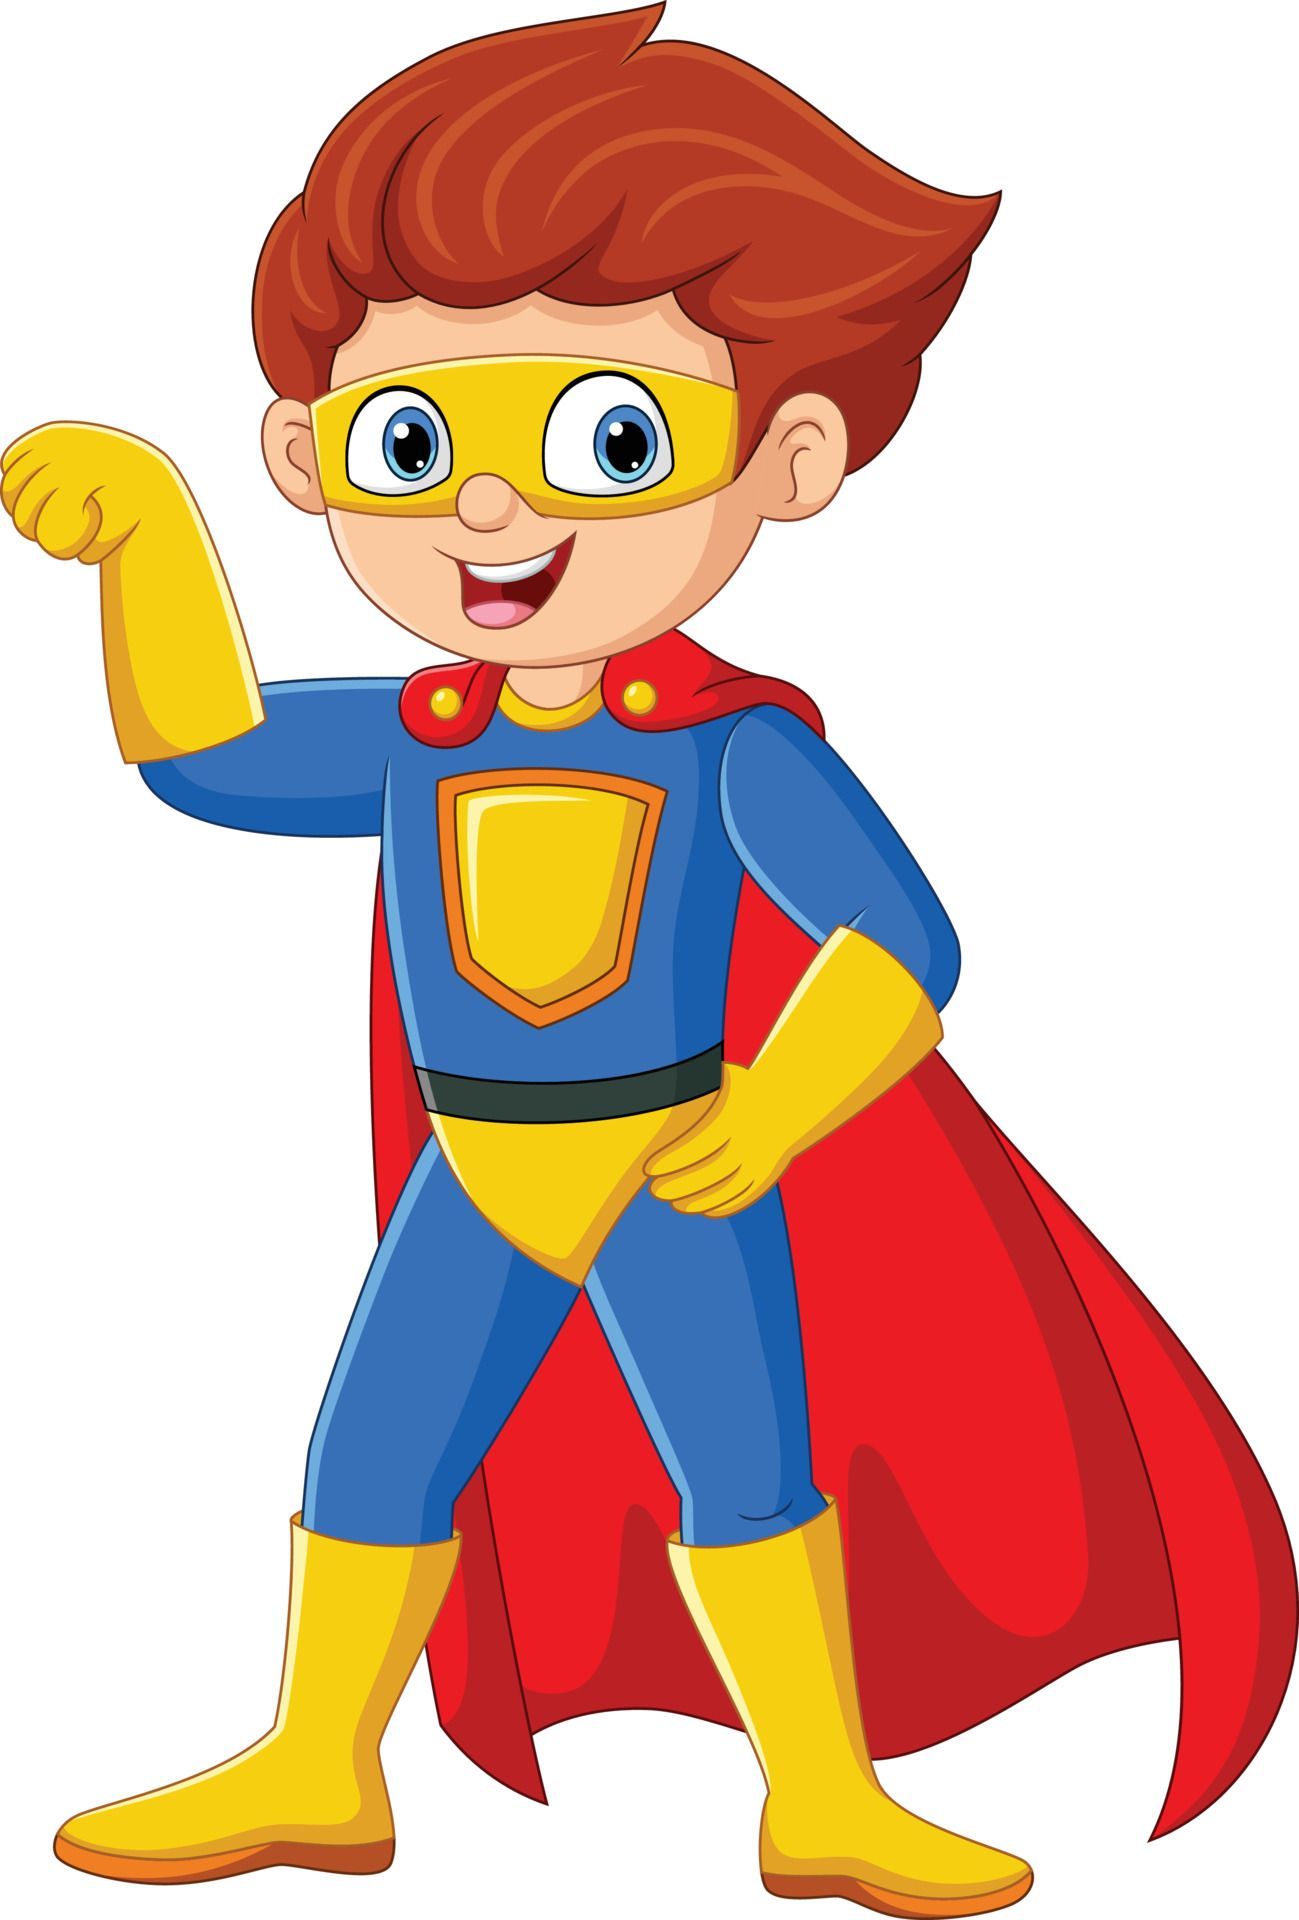 A cartoon boy in a superhero costume is standing on a white background.